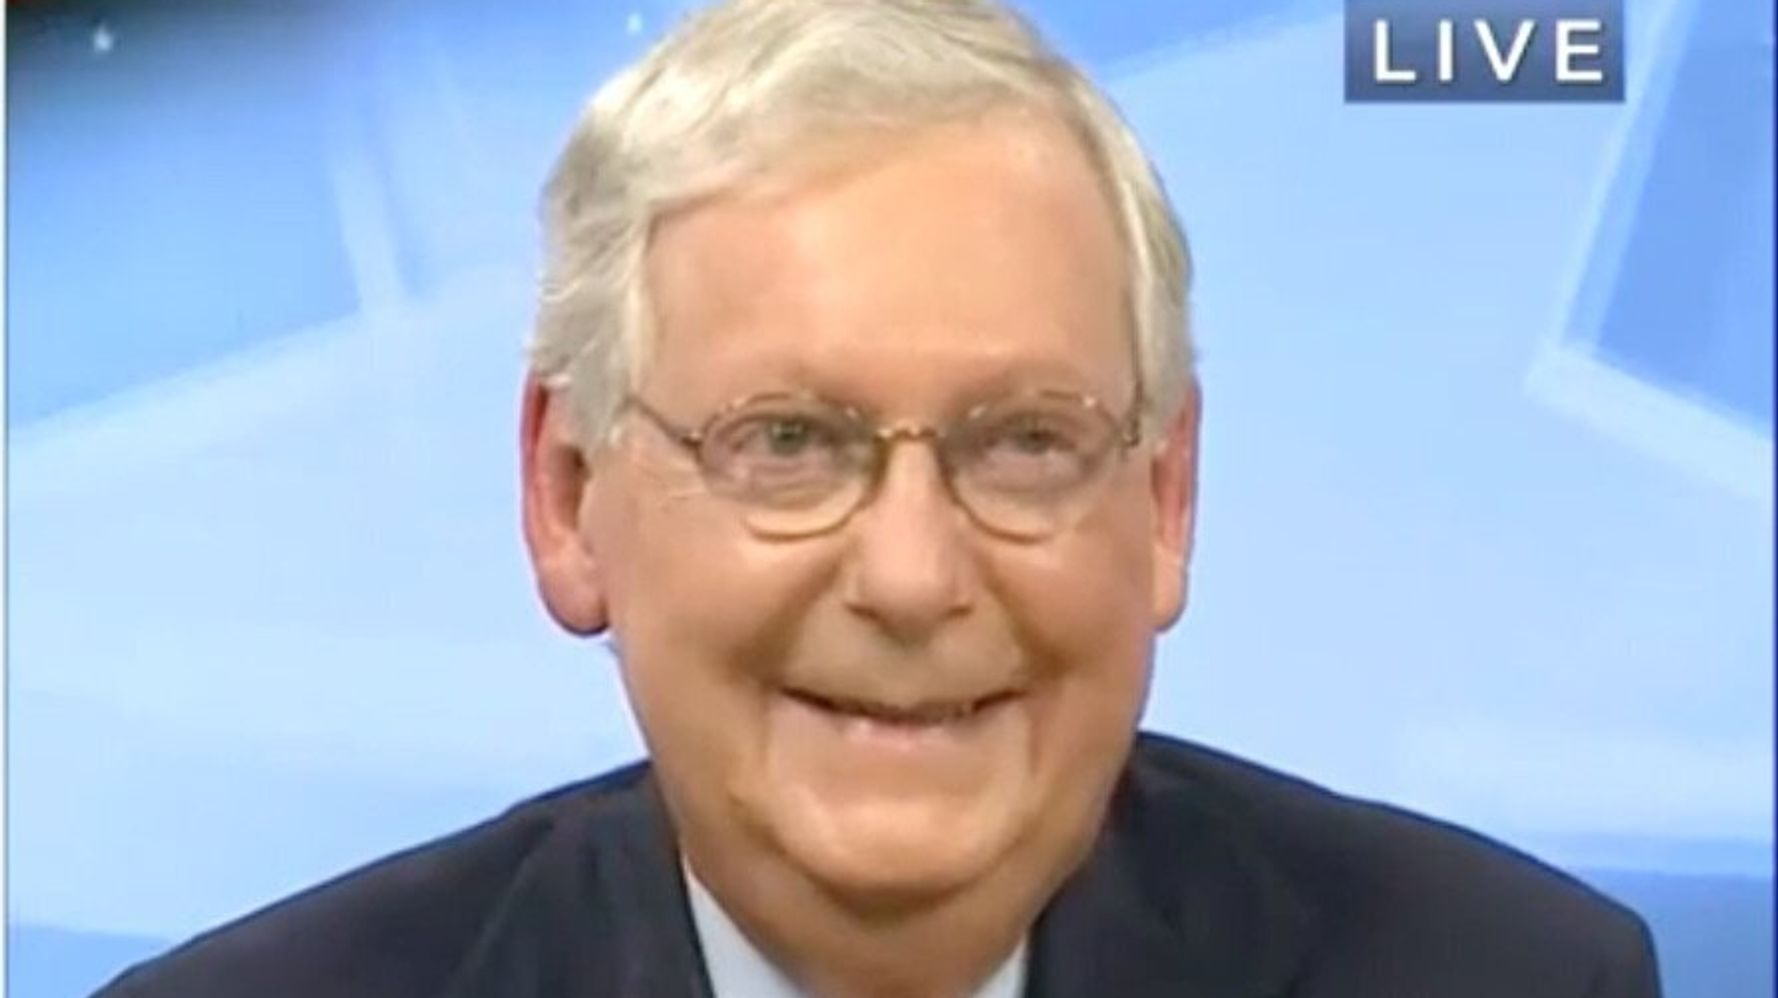 Mitch McConnell Laughs When Confronted On Senate Inaction Over Coronavirus